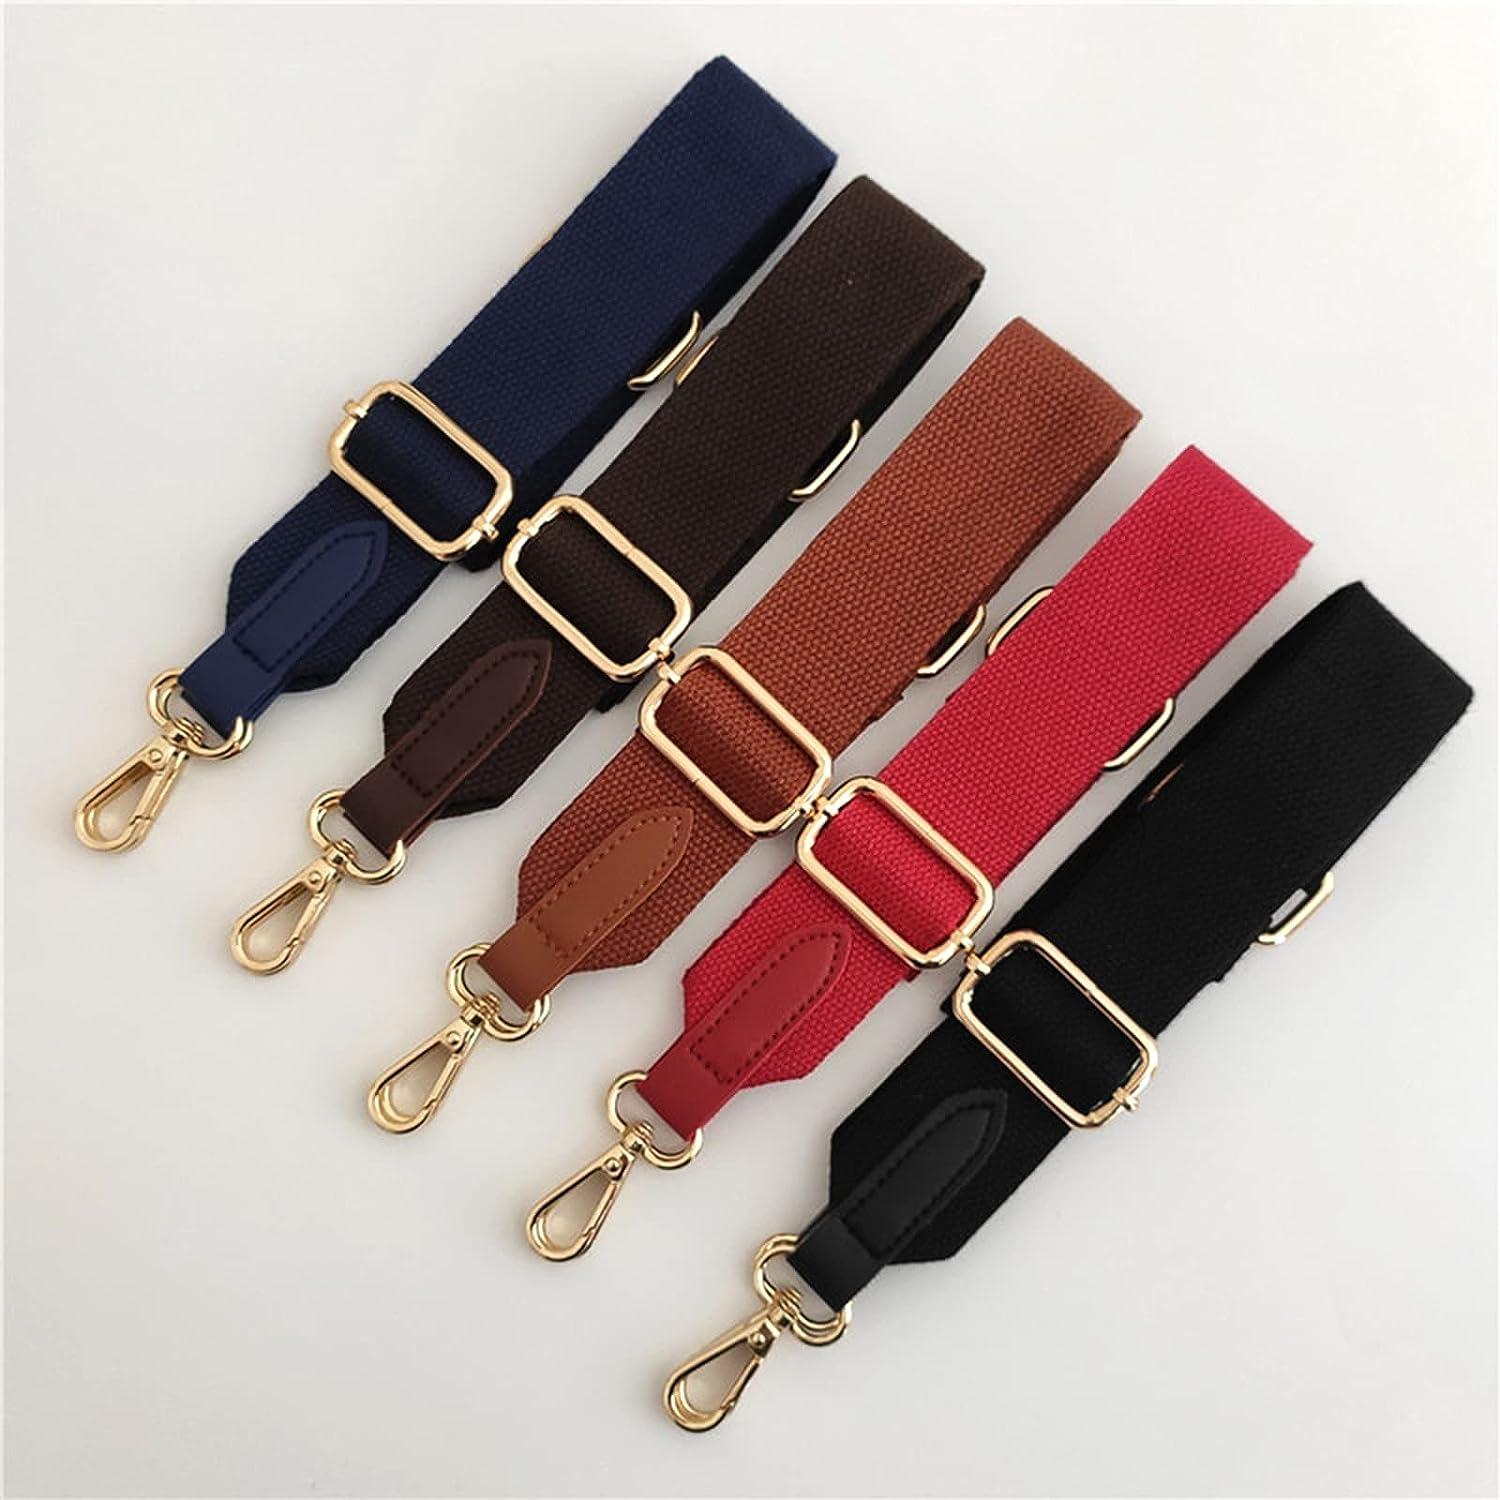  Beacone Wide Purse Strap Adjustable Canvas Replacement